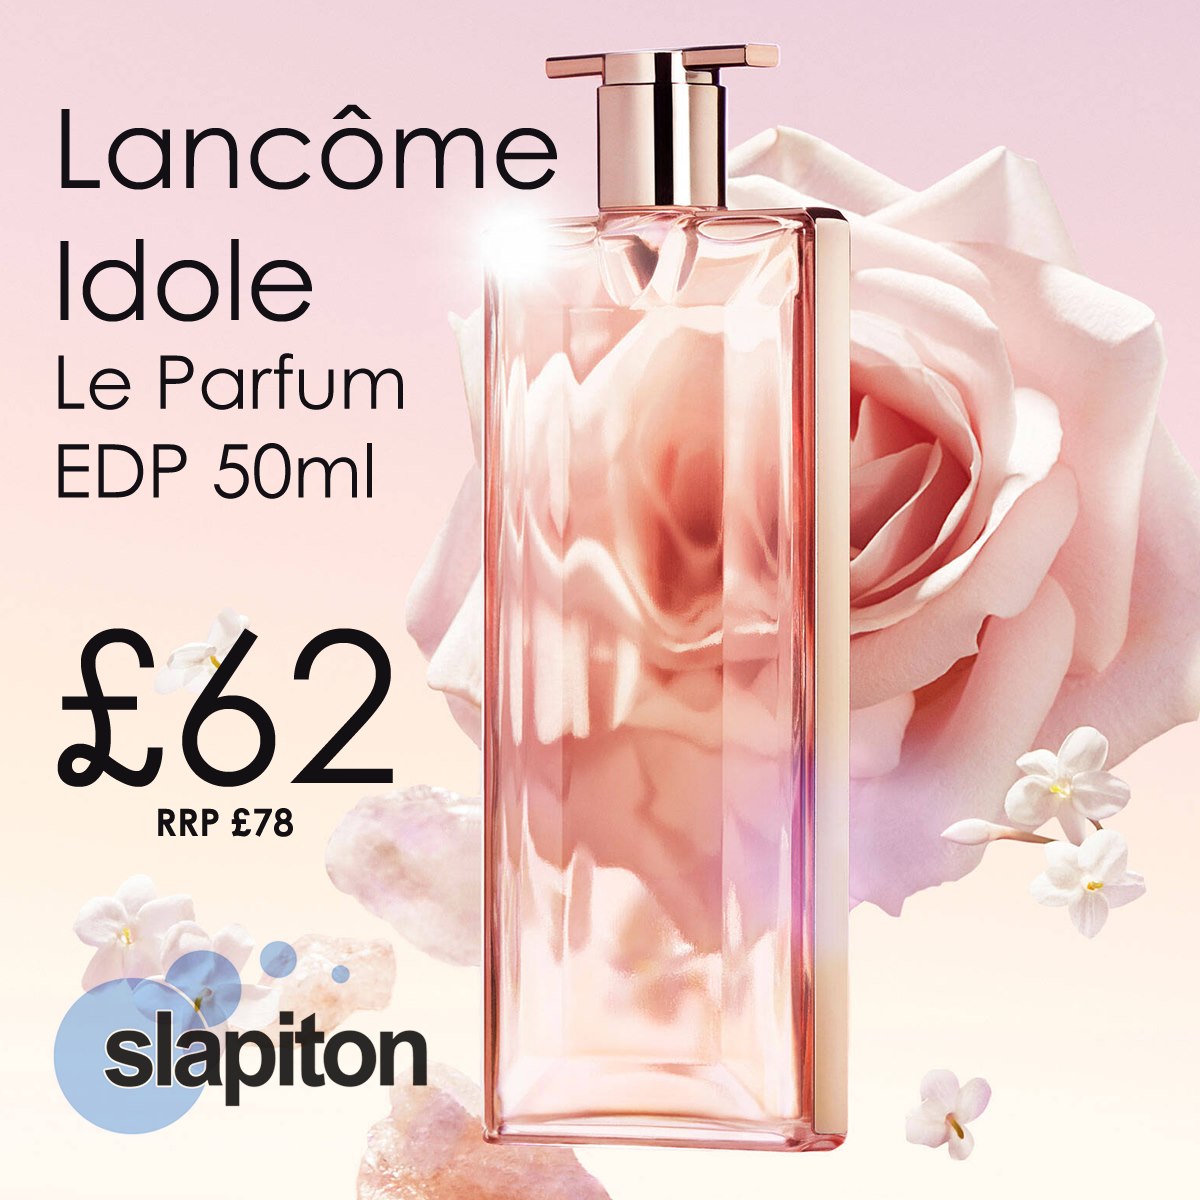 Lancome Idole Perfume Special Offer